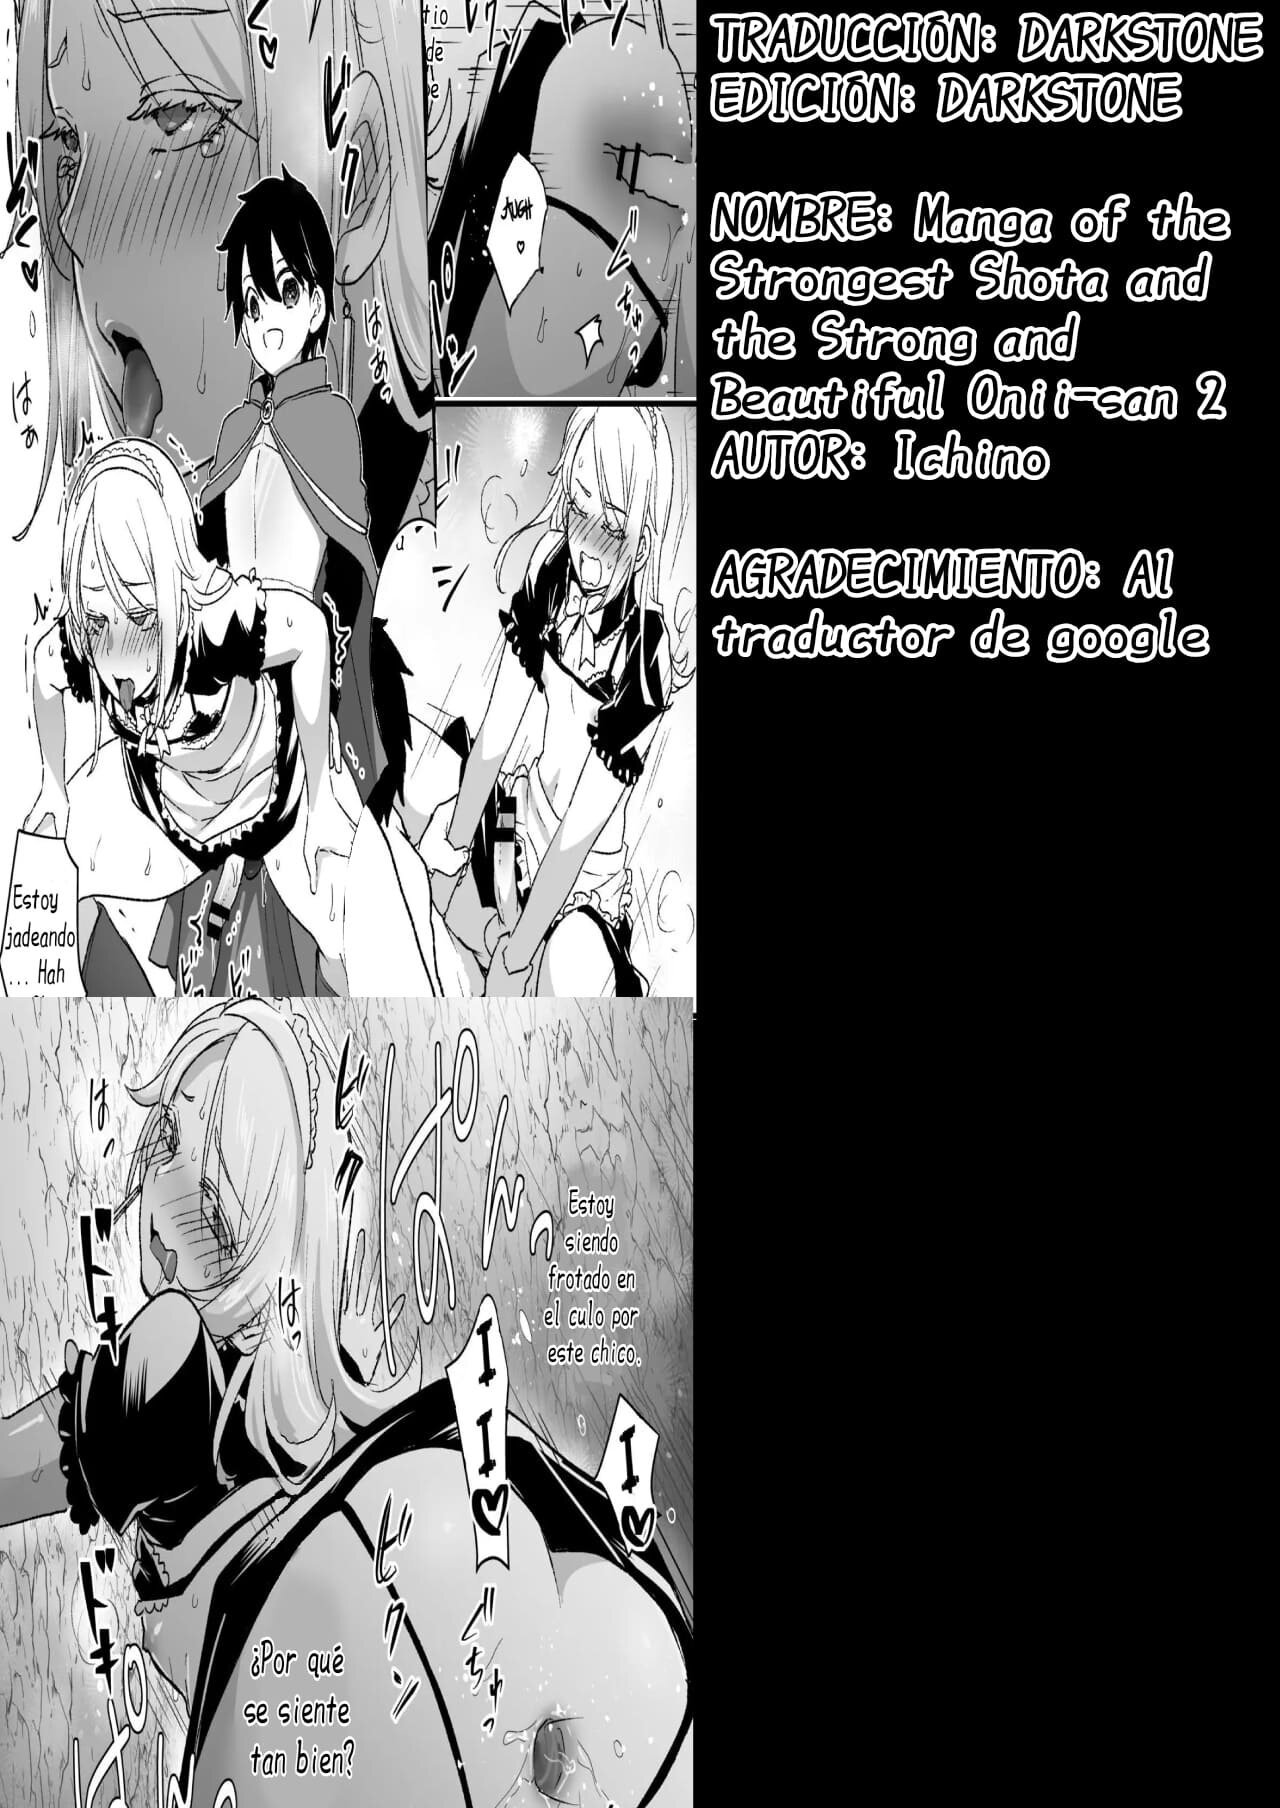 Manga of the Strongest Shota and the Strong and Beautiful Onii-san 2 - 4